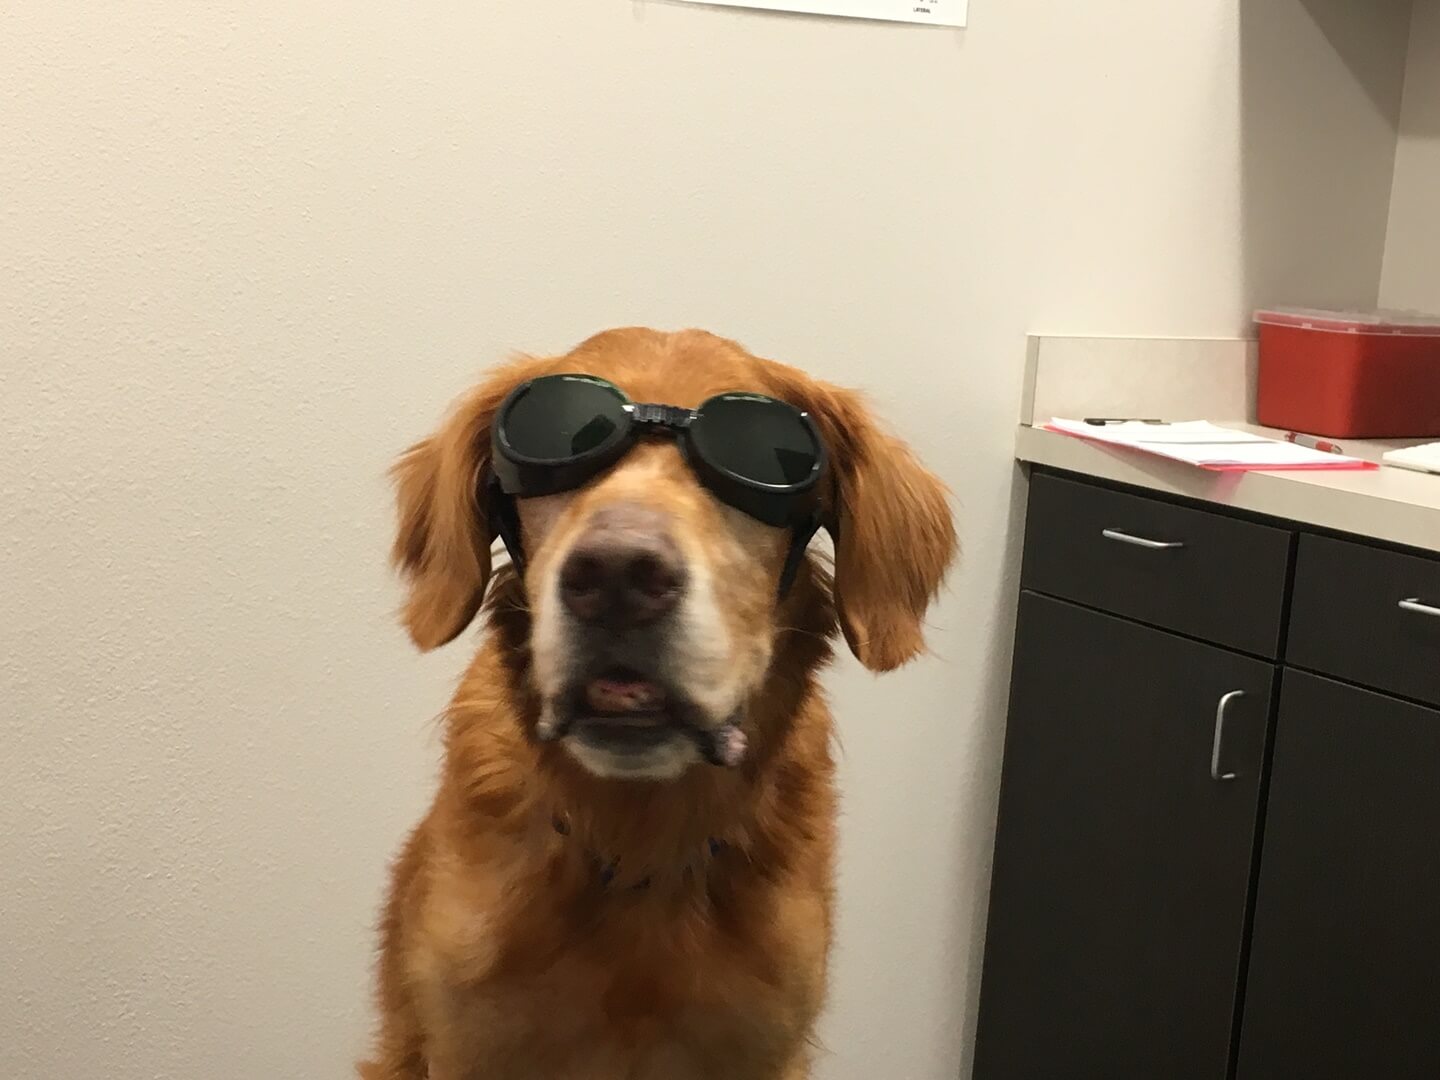 Ruger Ward wearing goggles